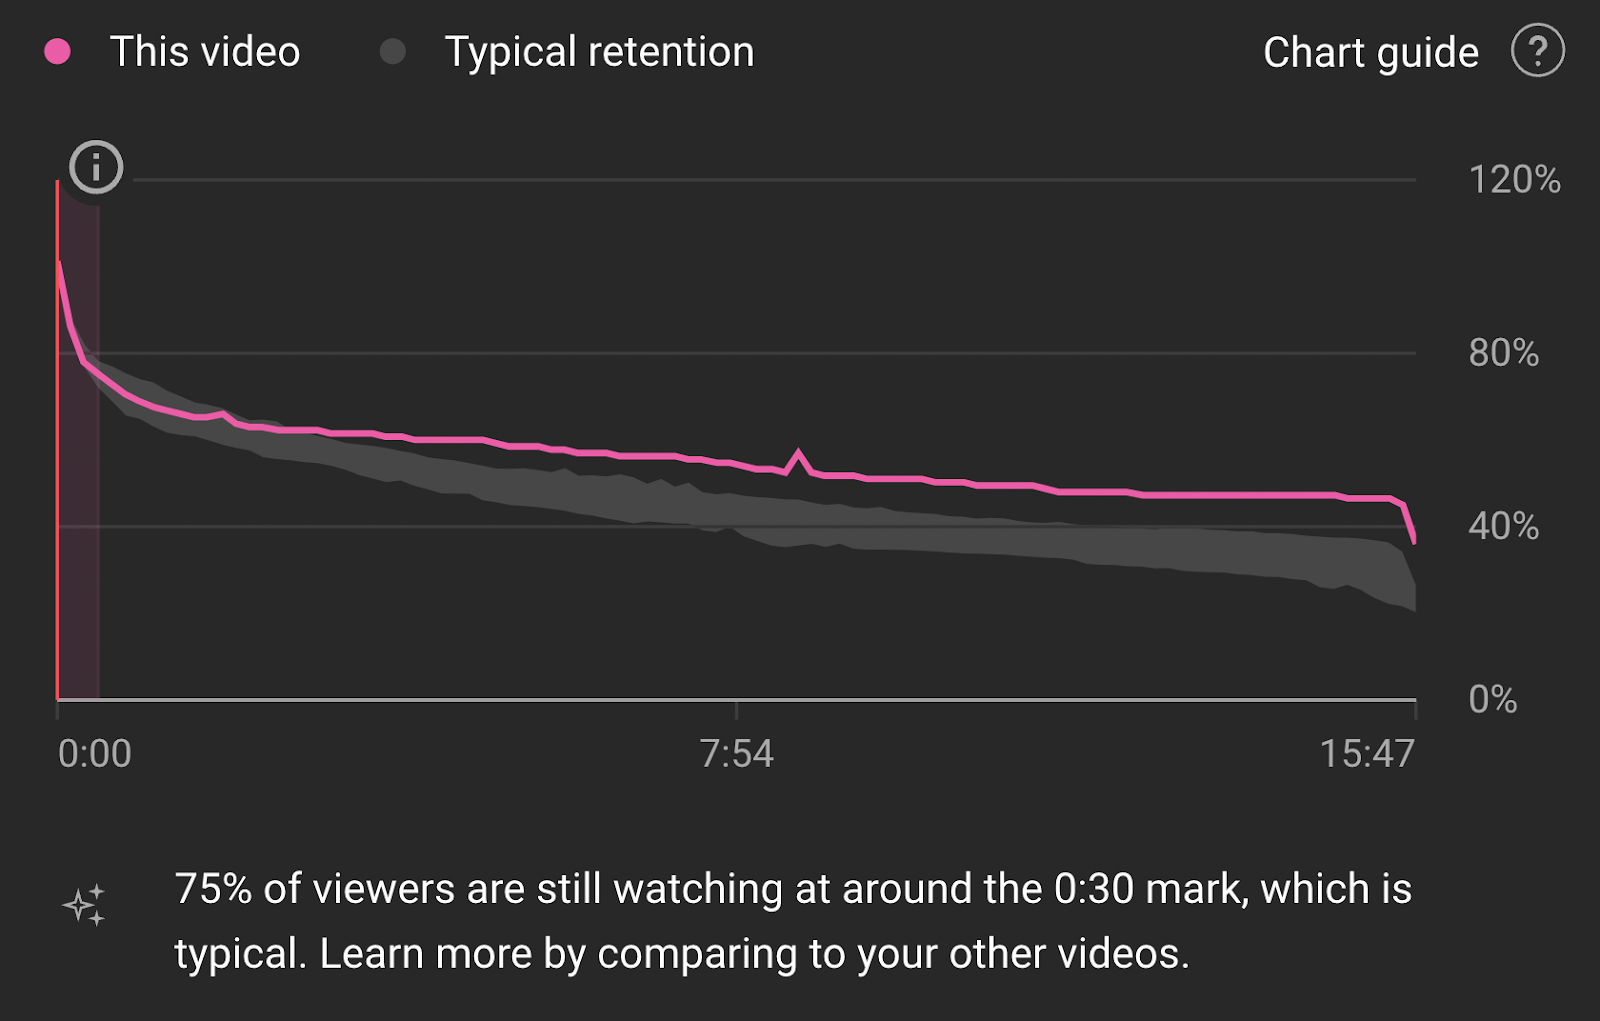 An image of a chart graph showing video view metrics. In this chart, about 25% of viewers drop off in the first 30 seconds. The rest stick around, with the number very slowly declining to about 40% at the end of the video.